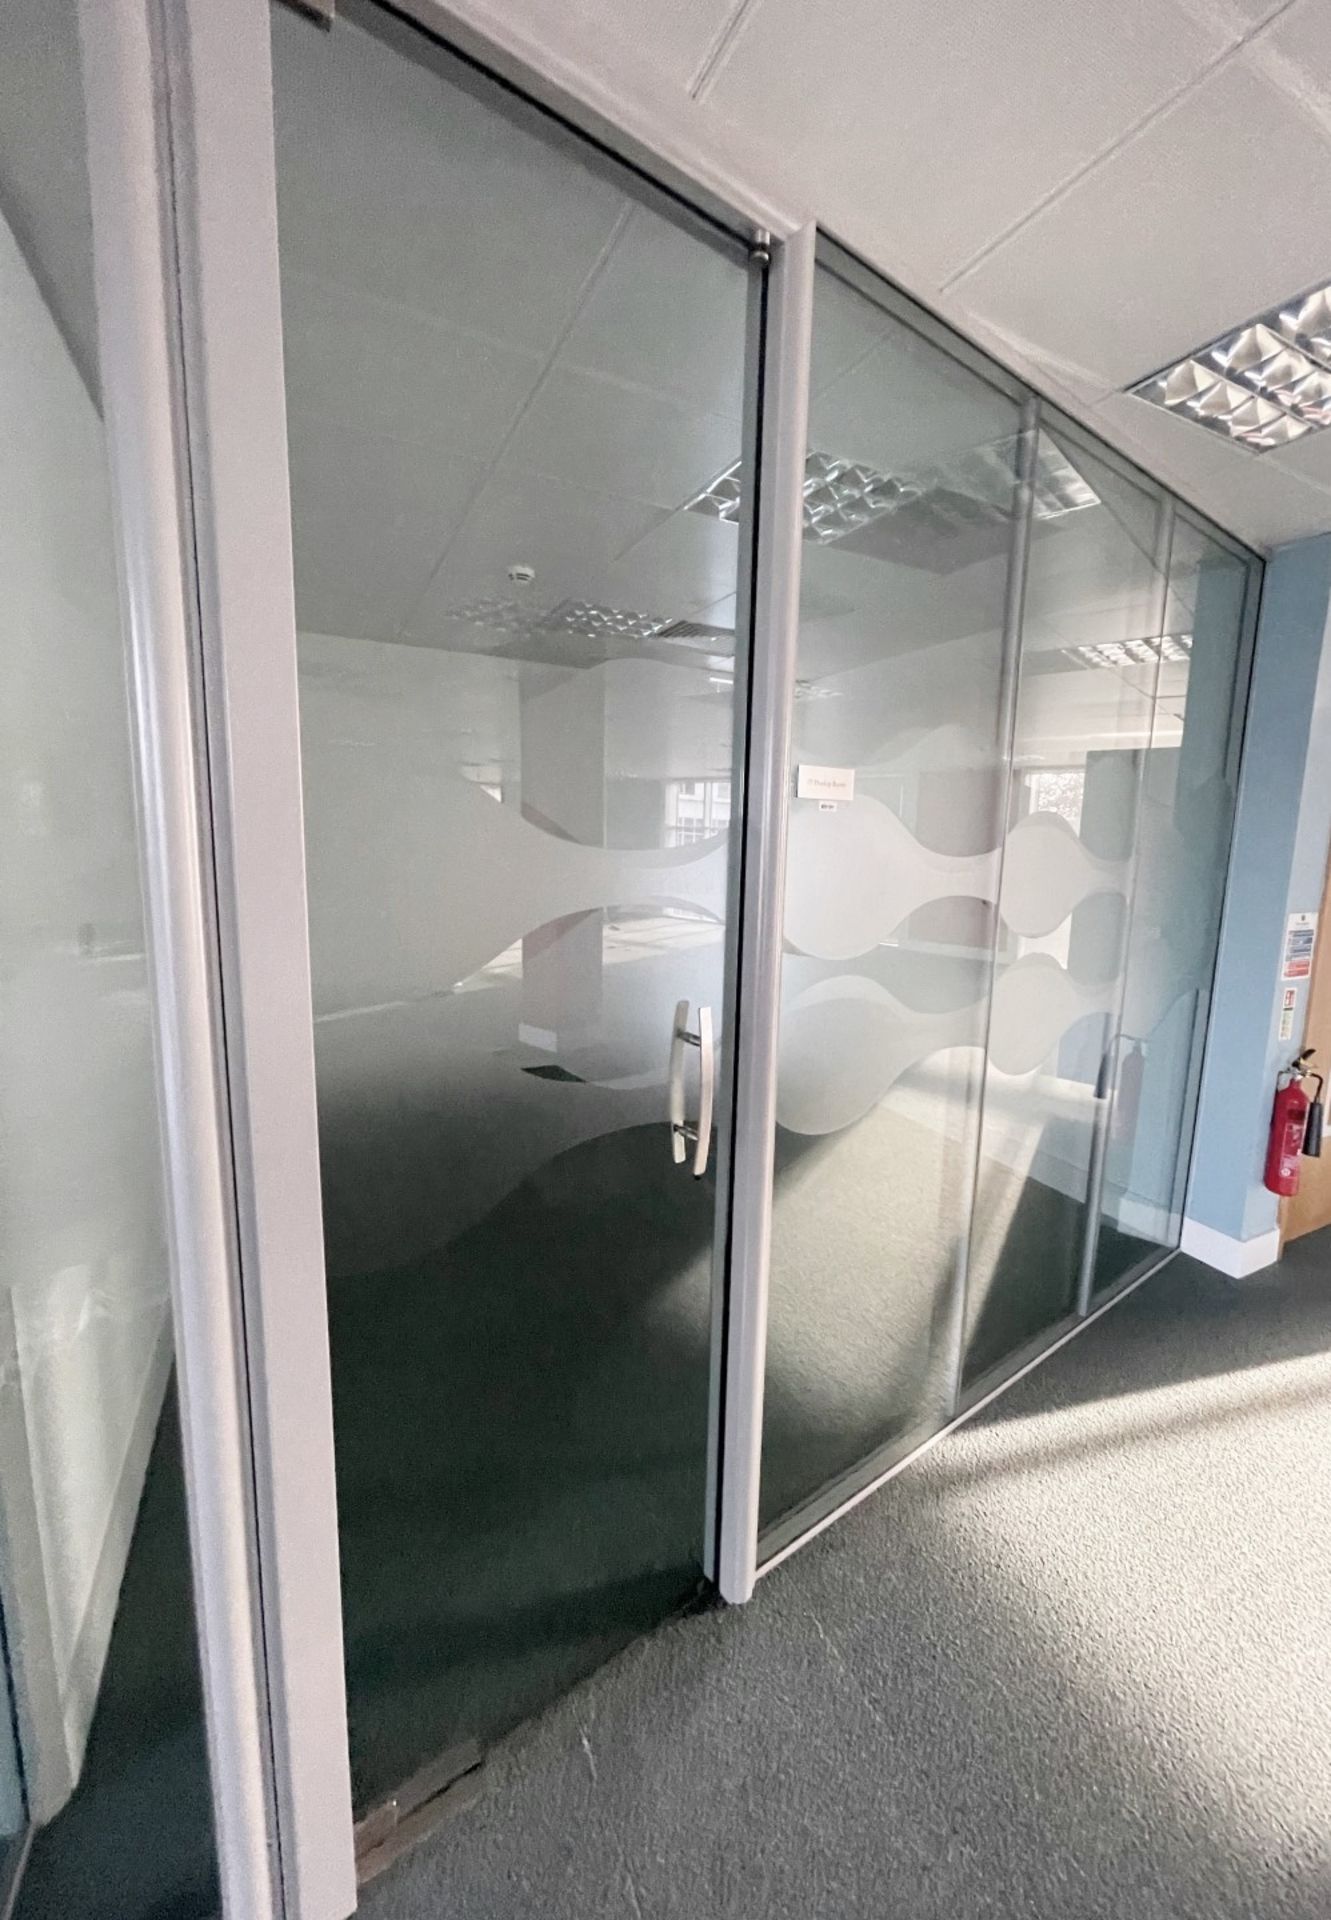 12 x Assorted Glass Partition Panels And Doors - Covers An Area Of 7.3 Metres Across, Height - Image 4 of 7